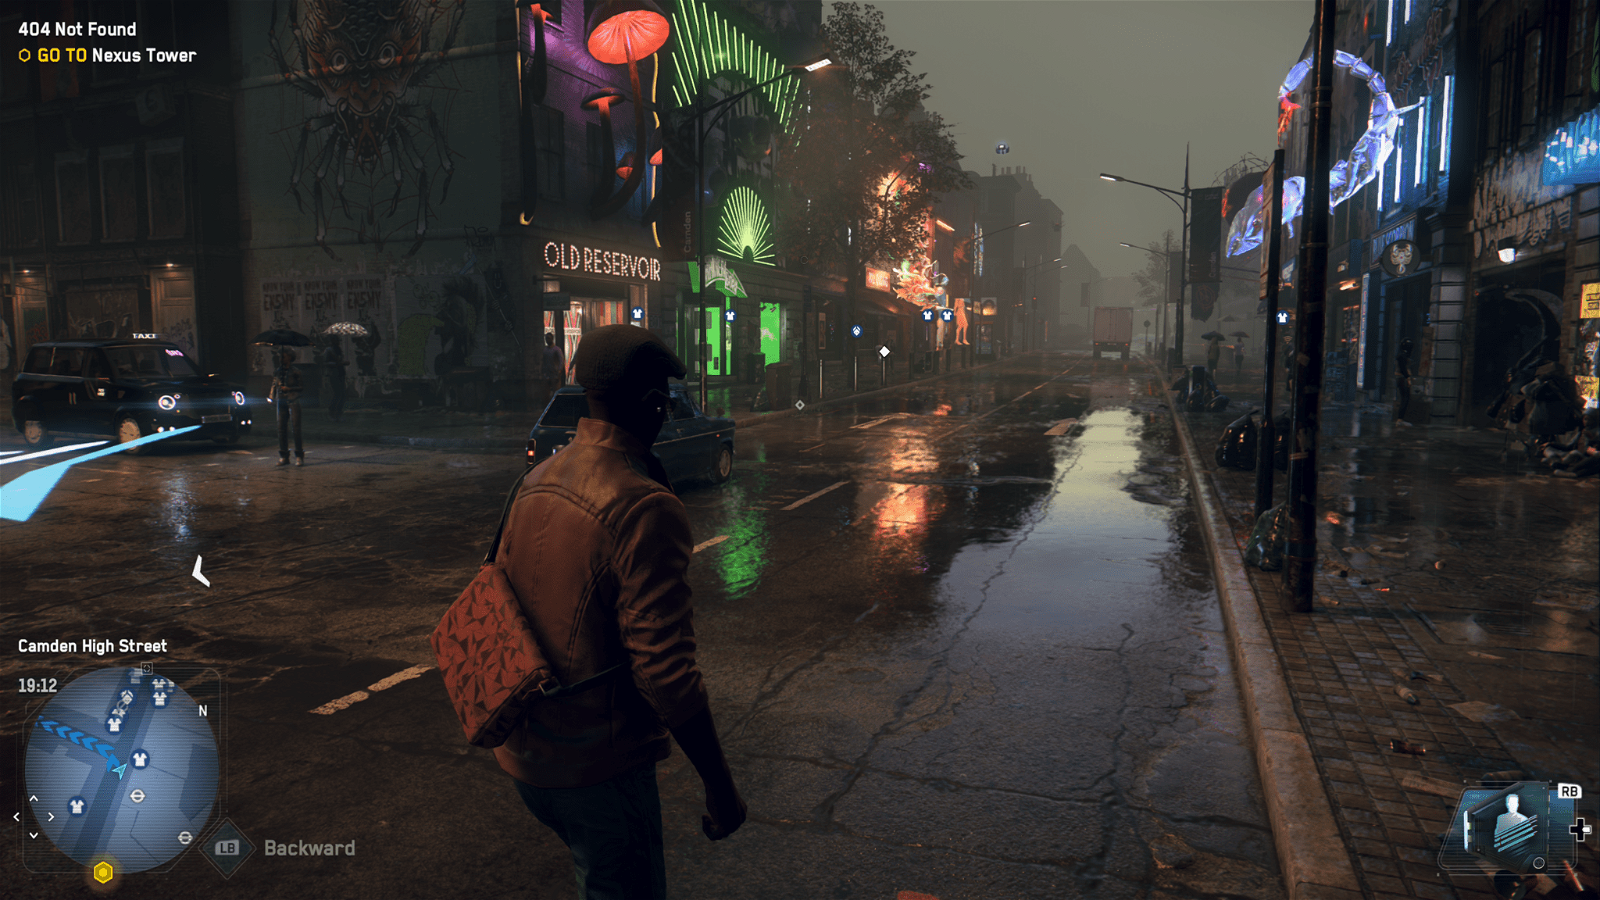 The Outerhaven's Watch Dogs: Legion Review